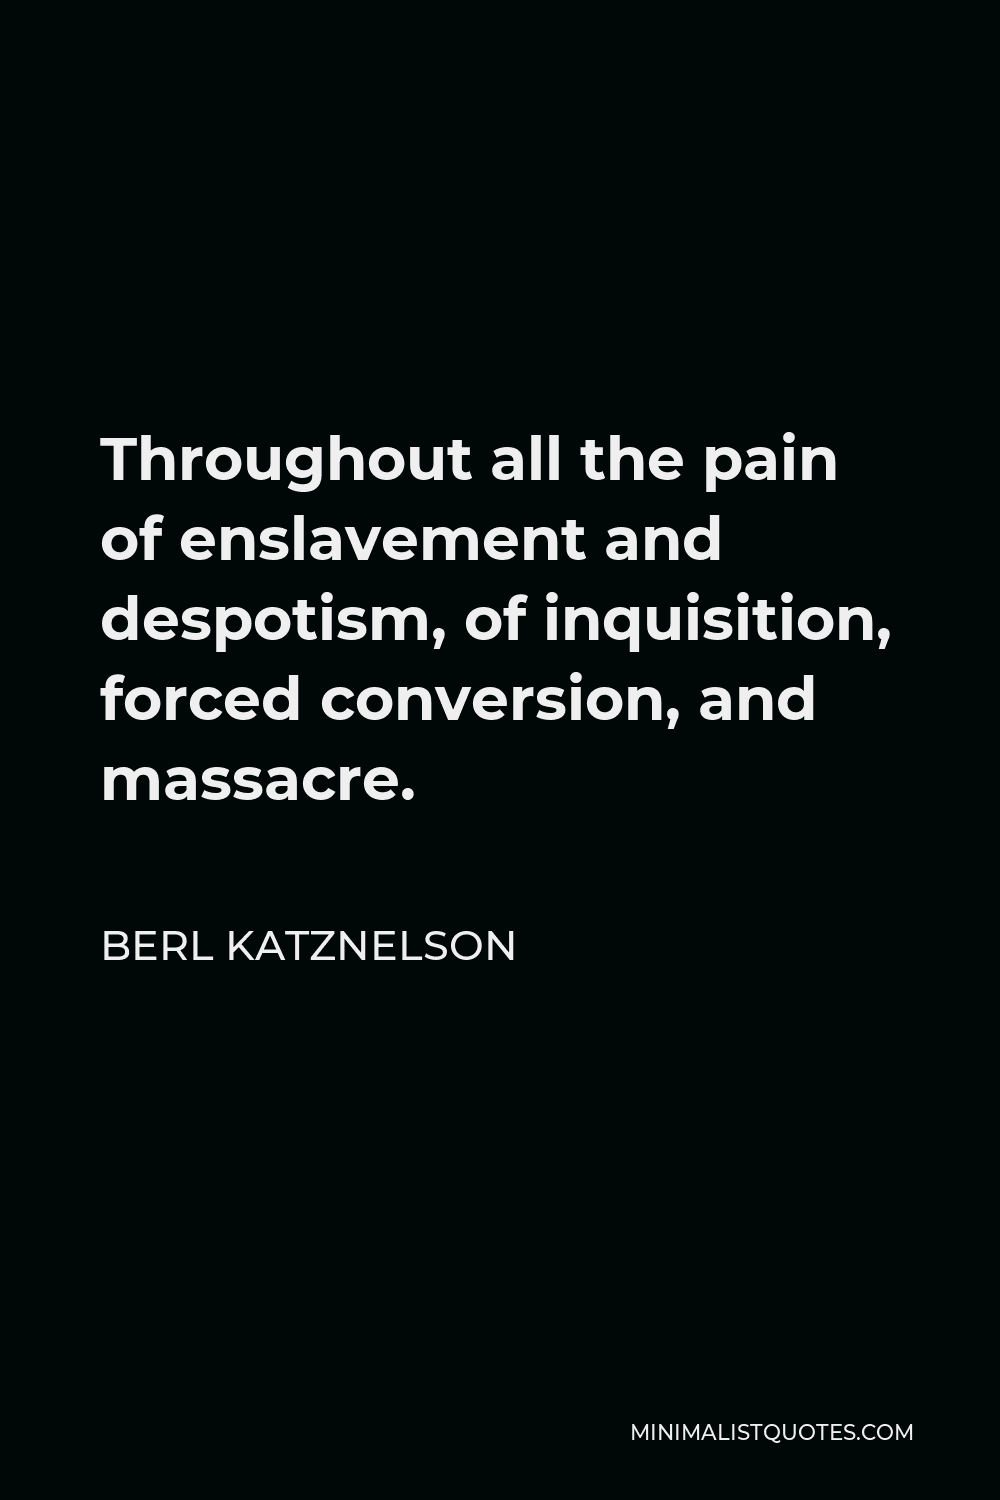 Berl Katznelson Quote - Throughout all the pain of enslavement and despotism, of inquisition, forced conversion, and massacre.